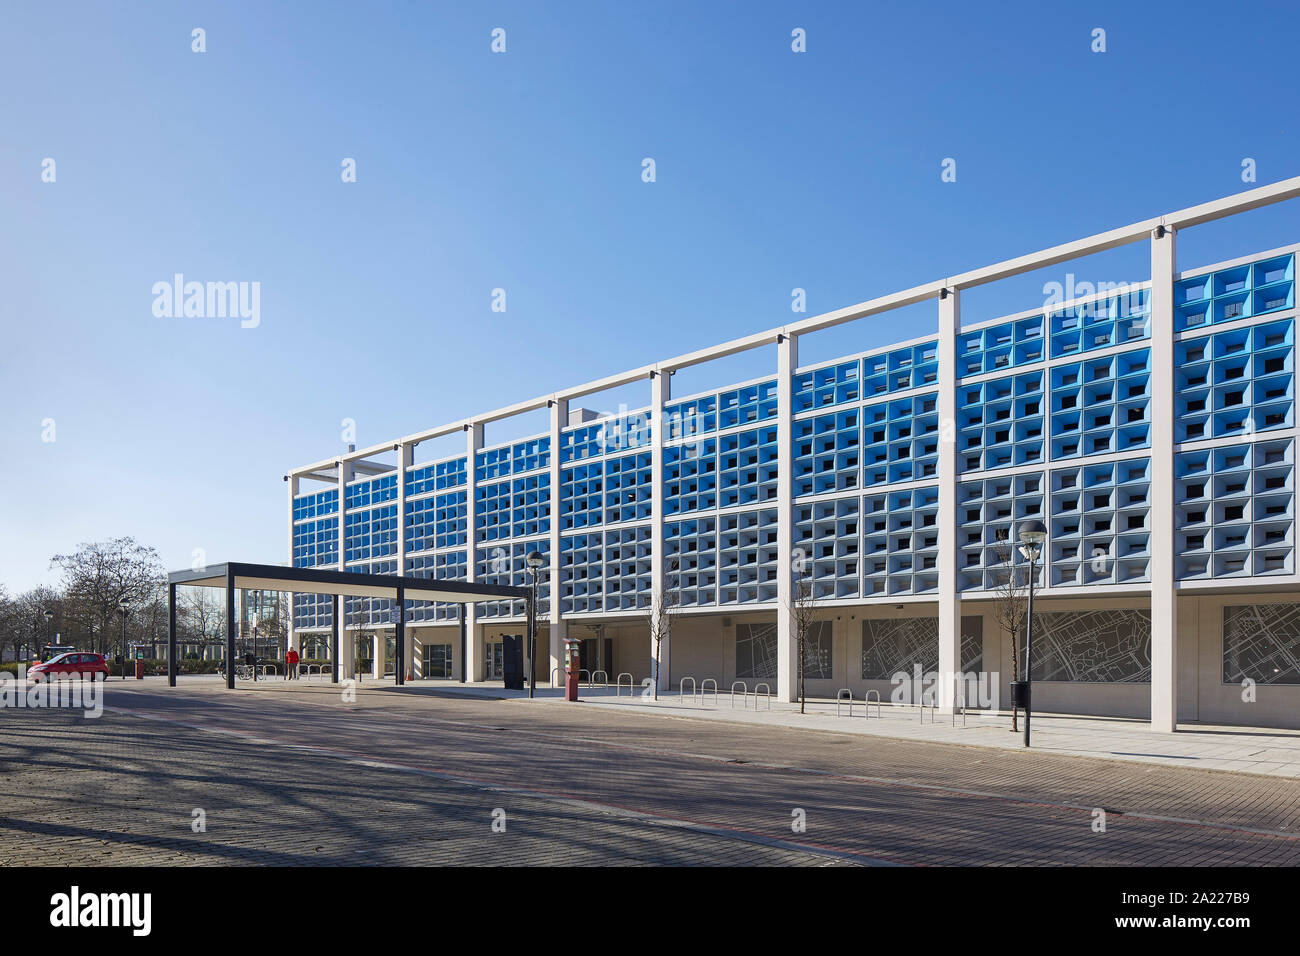 Perspective along exterior facade with stone panels and perforated metal screens. Centre MK, Milton Keynes, United Kingdom. Architect: Leslie Jones Ar Stock Photo